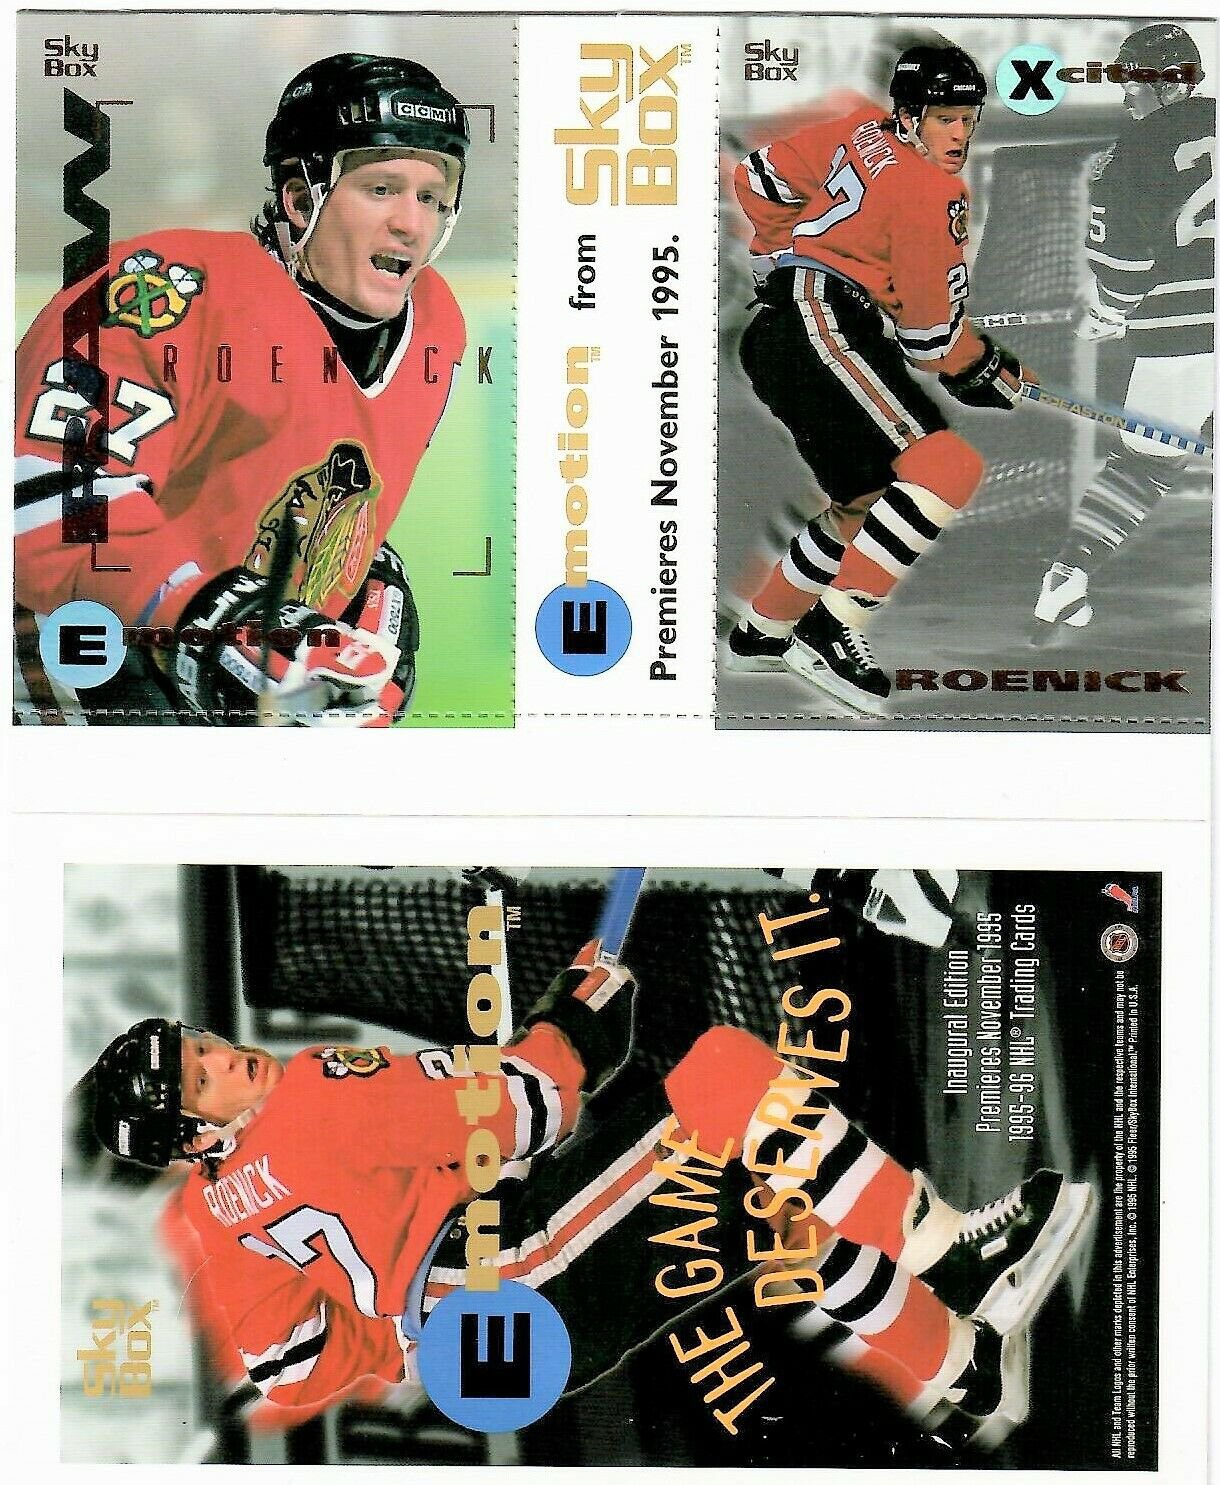 SkyBox JEREMY ROENICK Inaugural Edition Emotion Promo Card sheet of 3 Cards